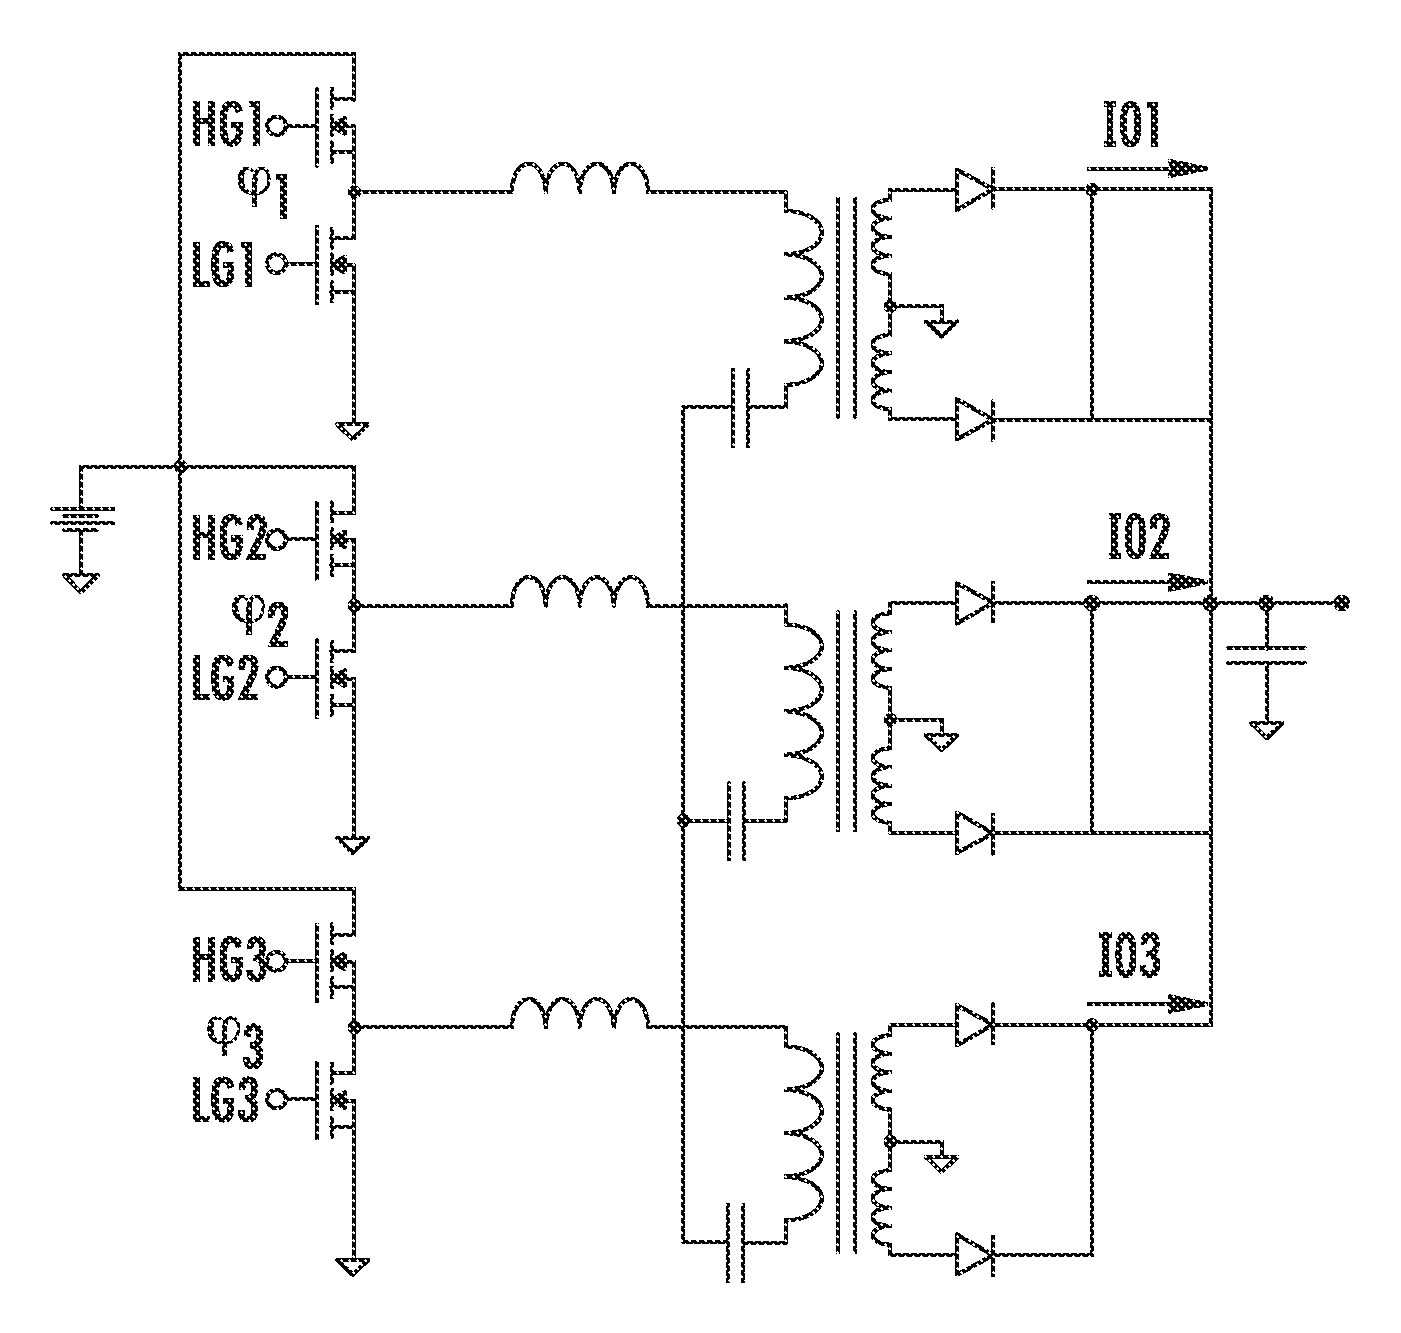 Multi-phase resonant converter and method of controlling it